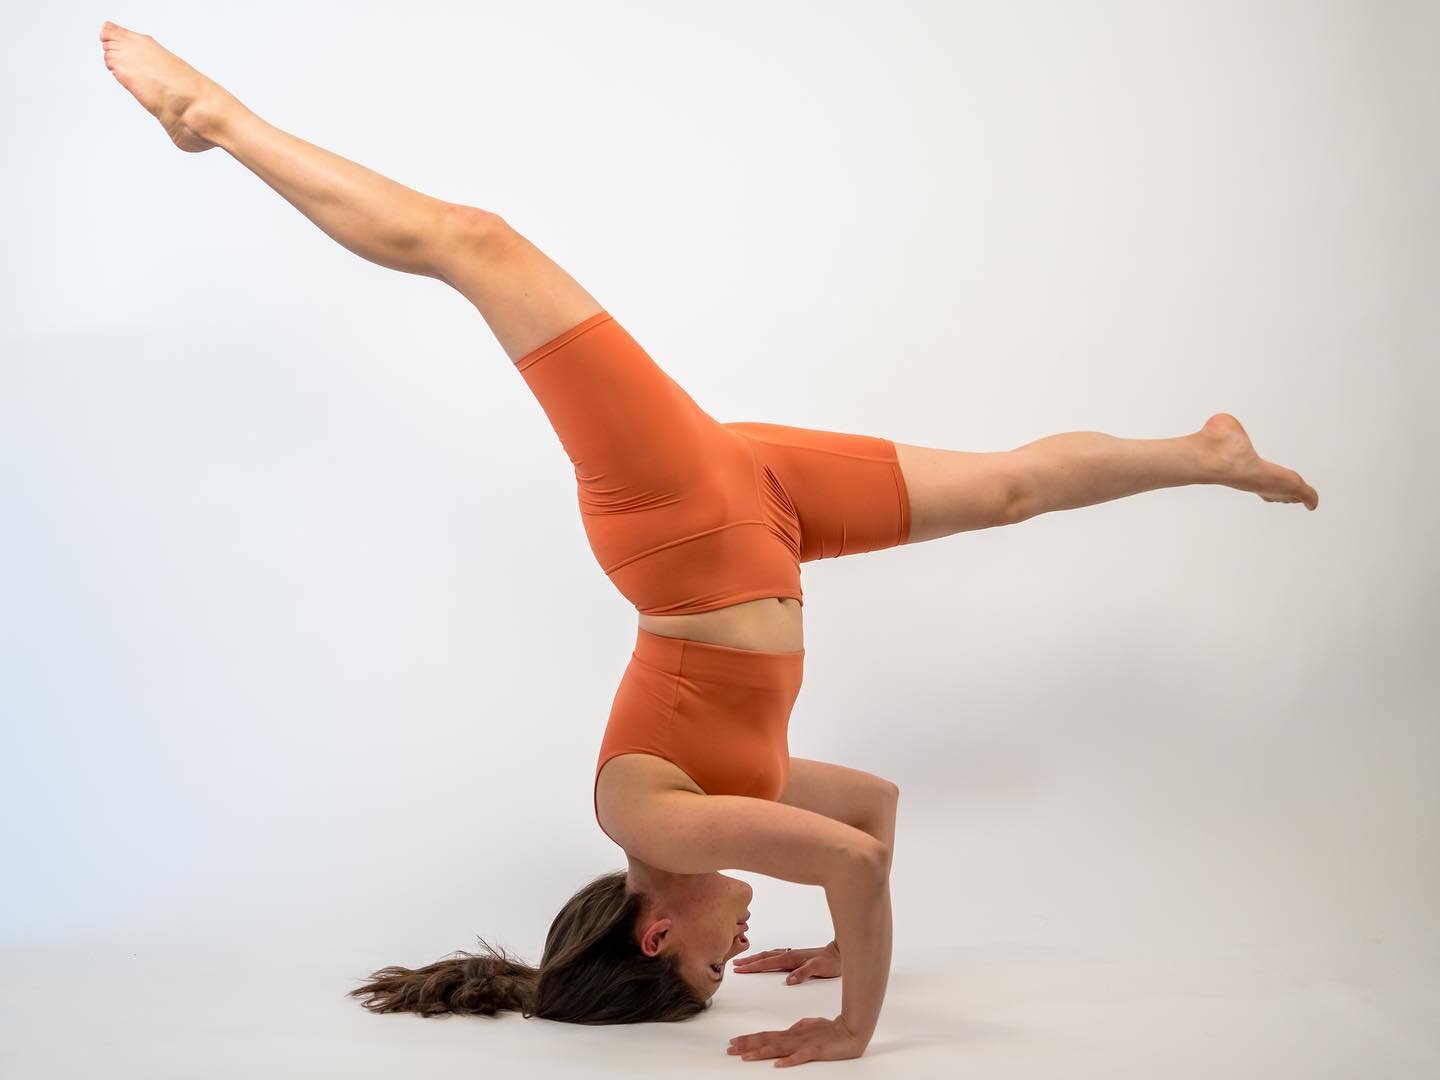 🧡 YOGA TO REALIGN 🧡

Starts this Wednesday evening 6:30 BST

I&rsquo;m thrilled at the thought of teaching online again, coming together with people from all over the world.... Especially Italy 😉 💚🤍❤️

(Sorry had to fit that in🙊feeling v proud 